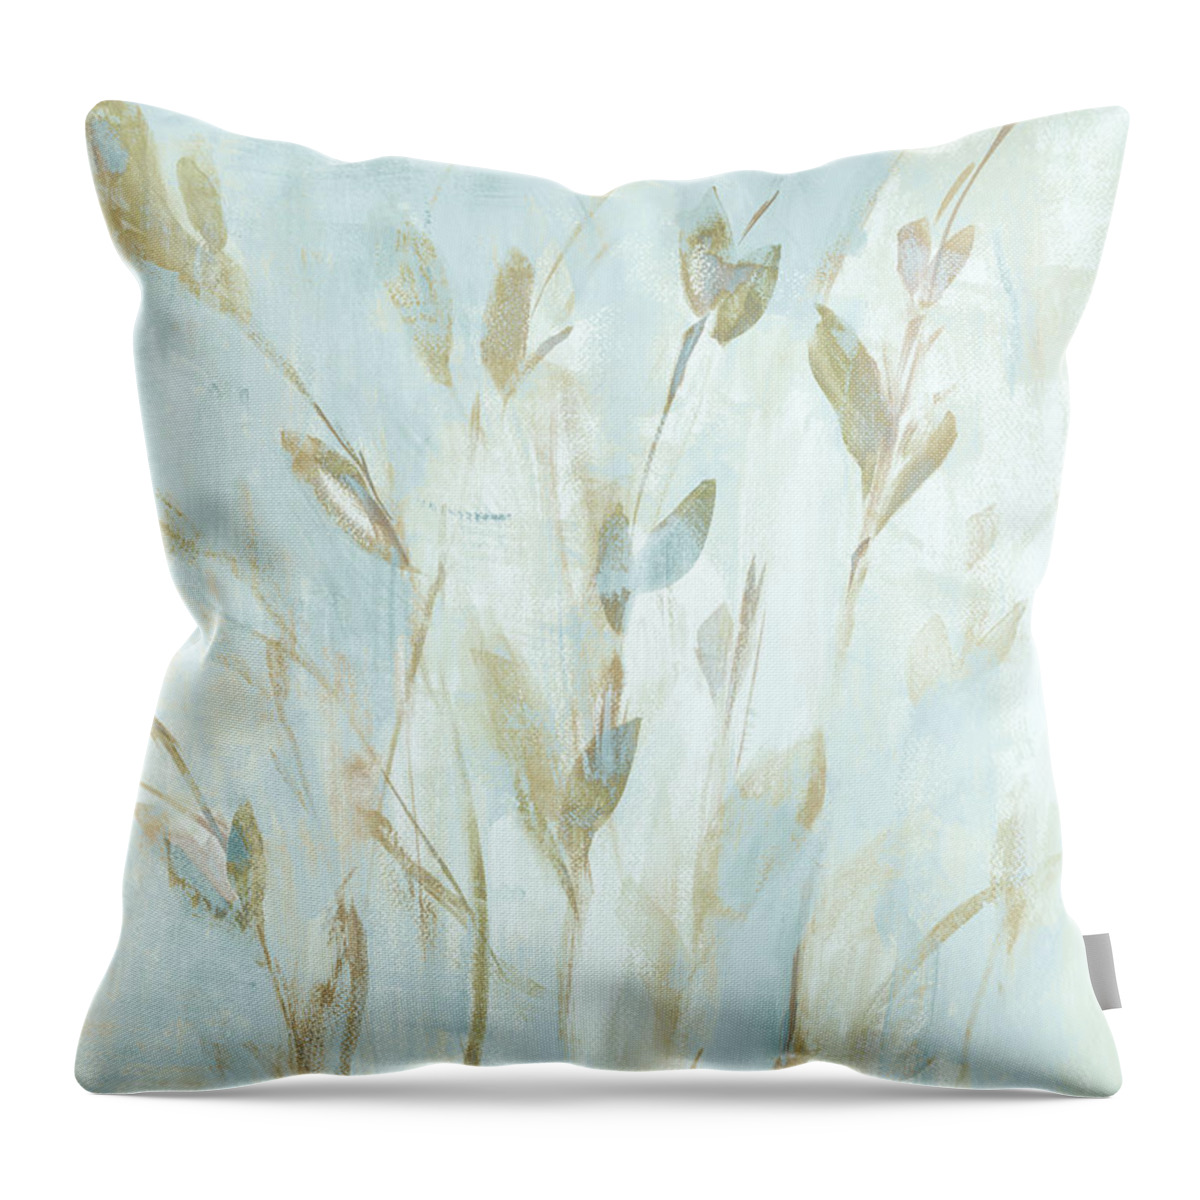 Soft Throw Pillow featuring the painting Soft Misty Leaves by Lanie Loreth